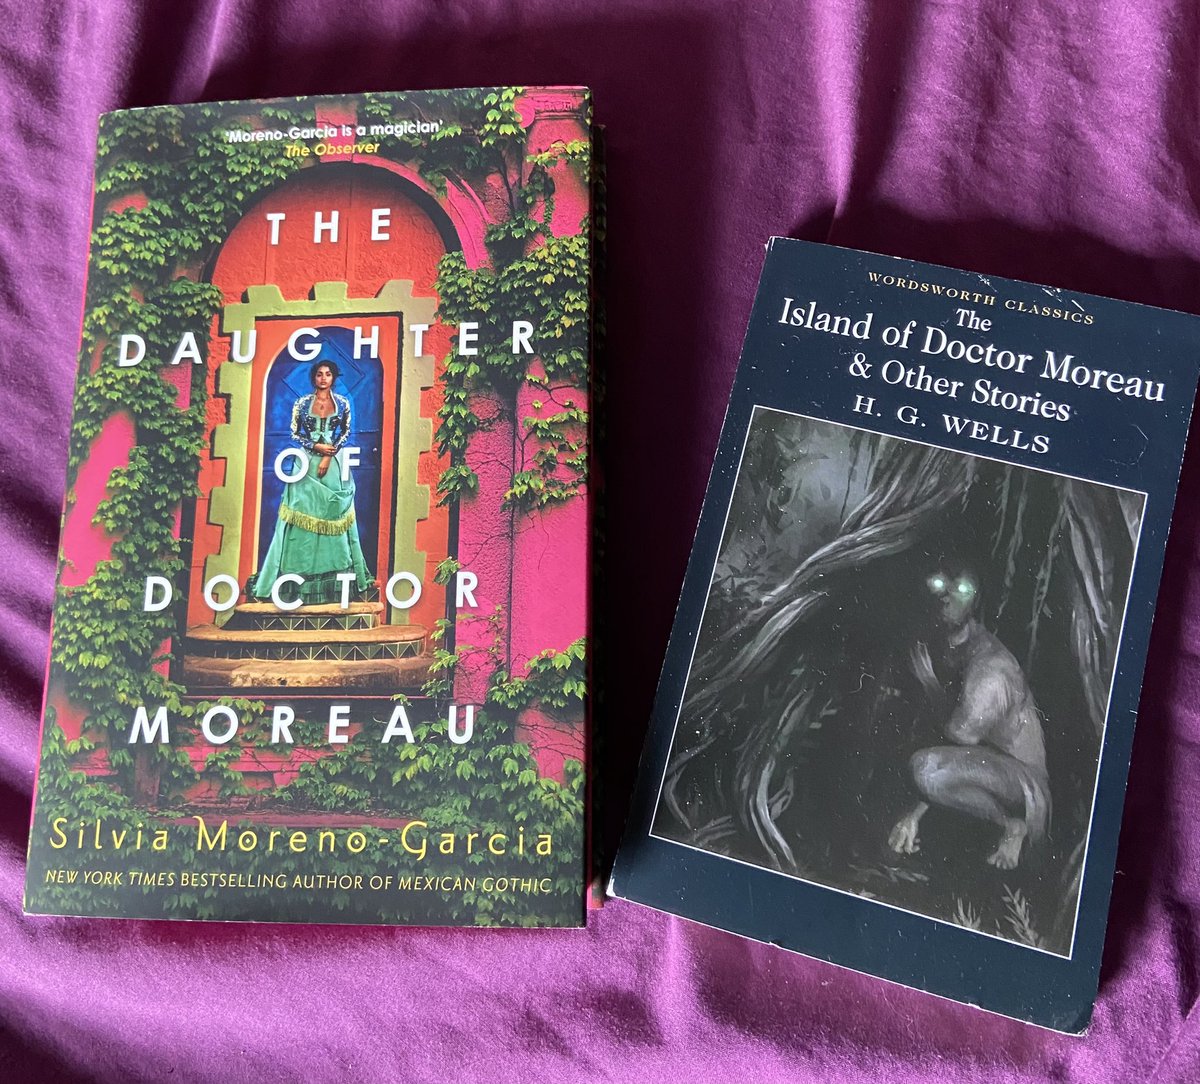 New (and old!) book day. #TheDaughterOfDoctorMoreau by Silvia Moreno-Garcia and The Island of Doctor Moreau by H.G Wells. I haven’t read Island since my final paper during University days, looking forward to revisiting it, and love Moreno-Garcia’s writing, so this will be fun!